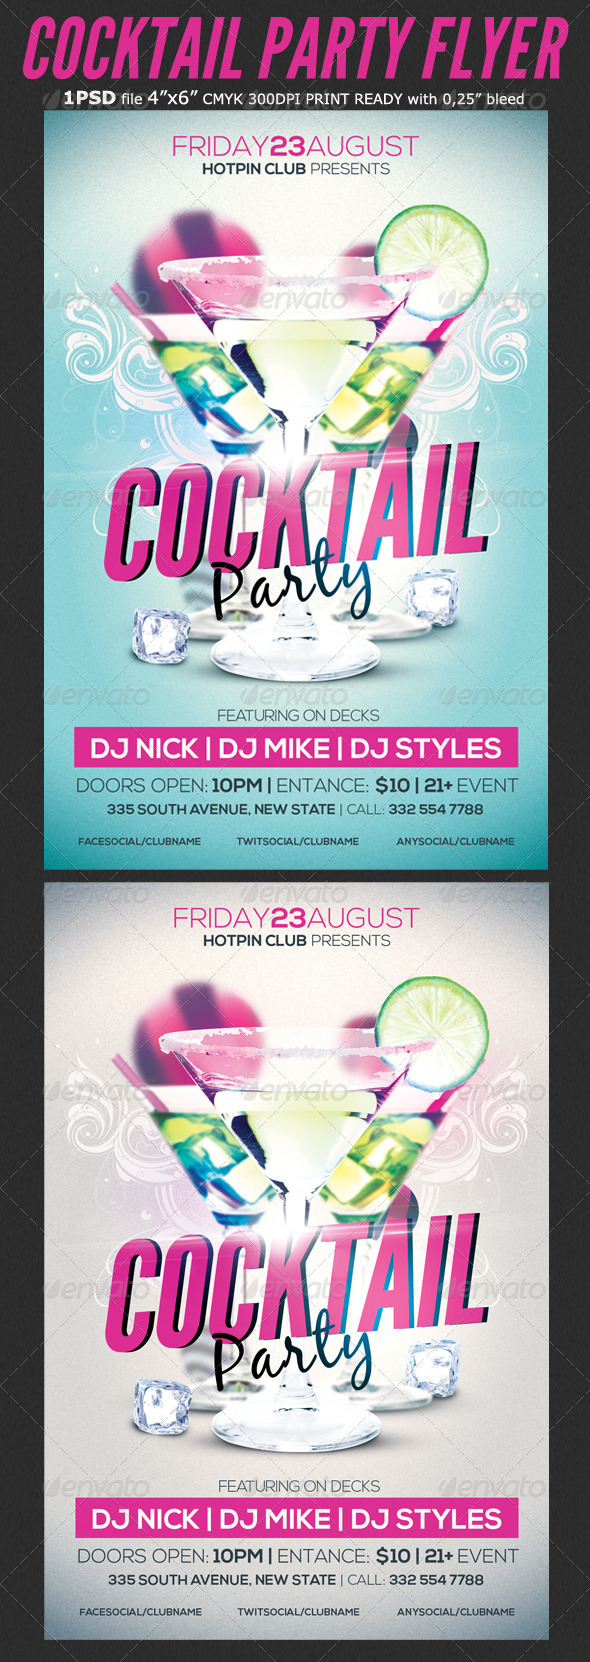 Cocktail Party Flyer Template 2